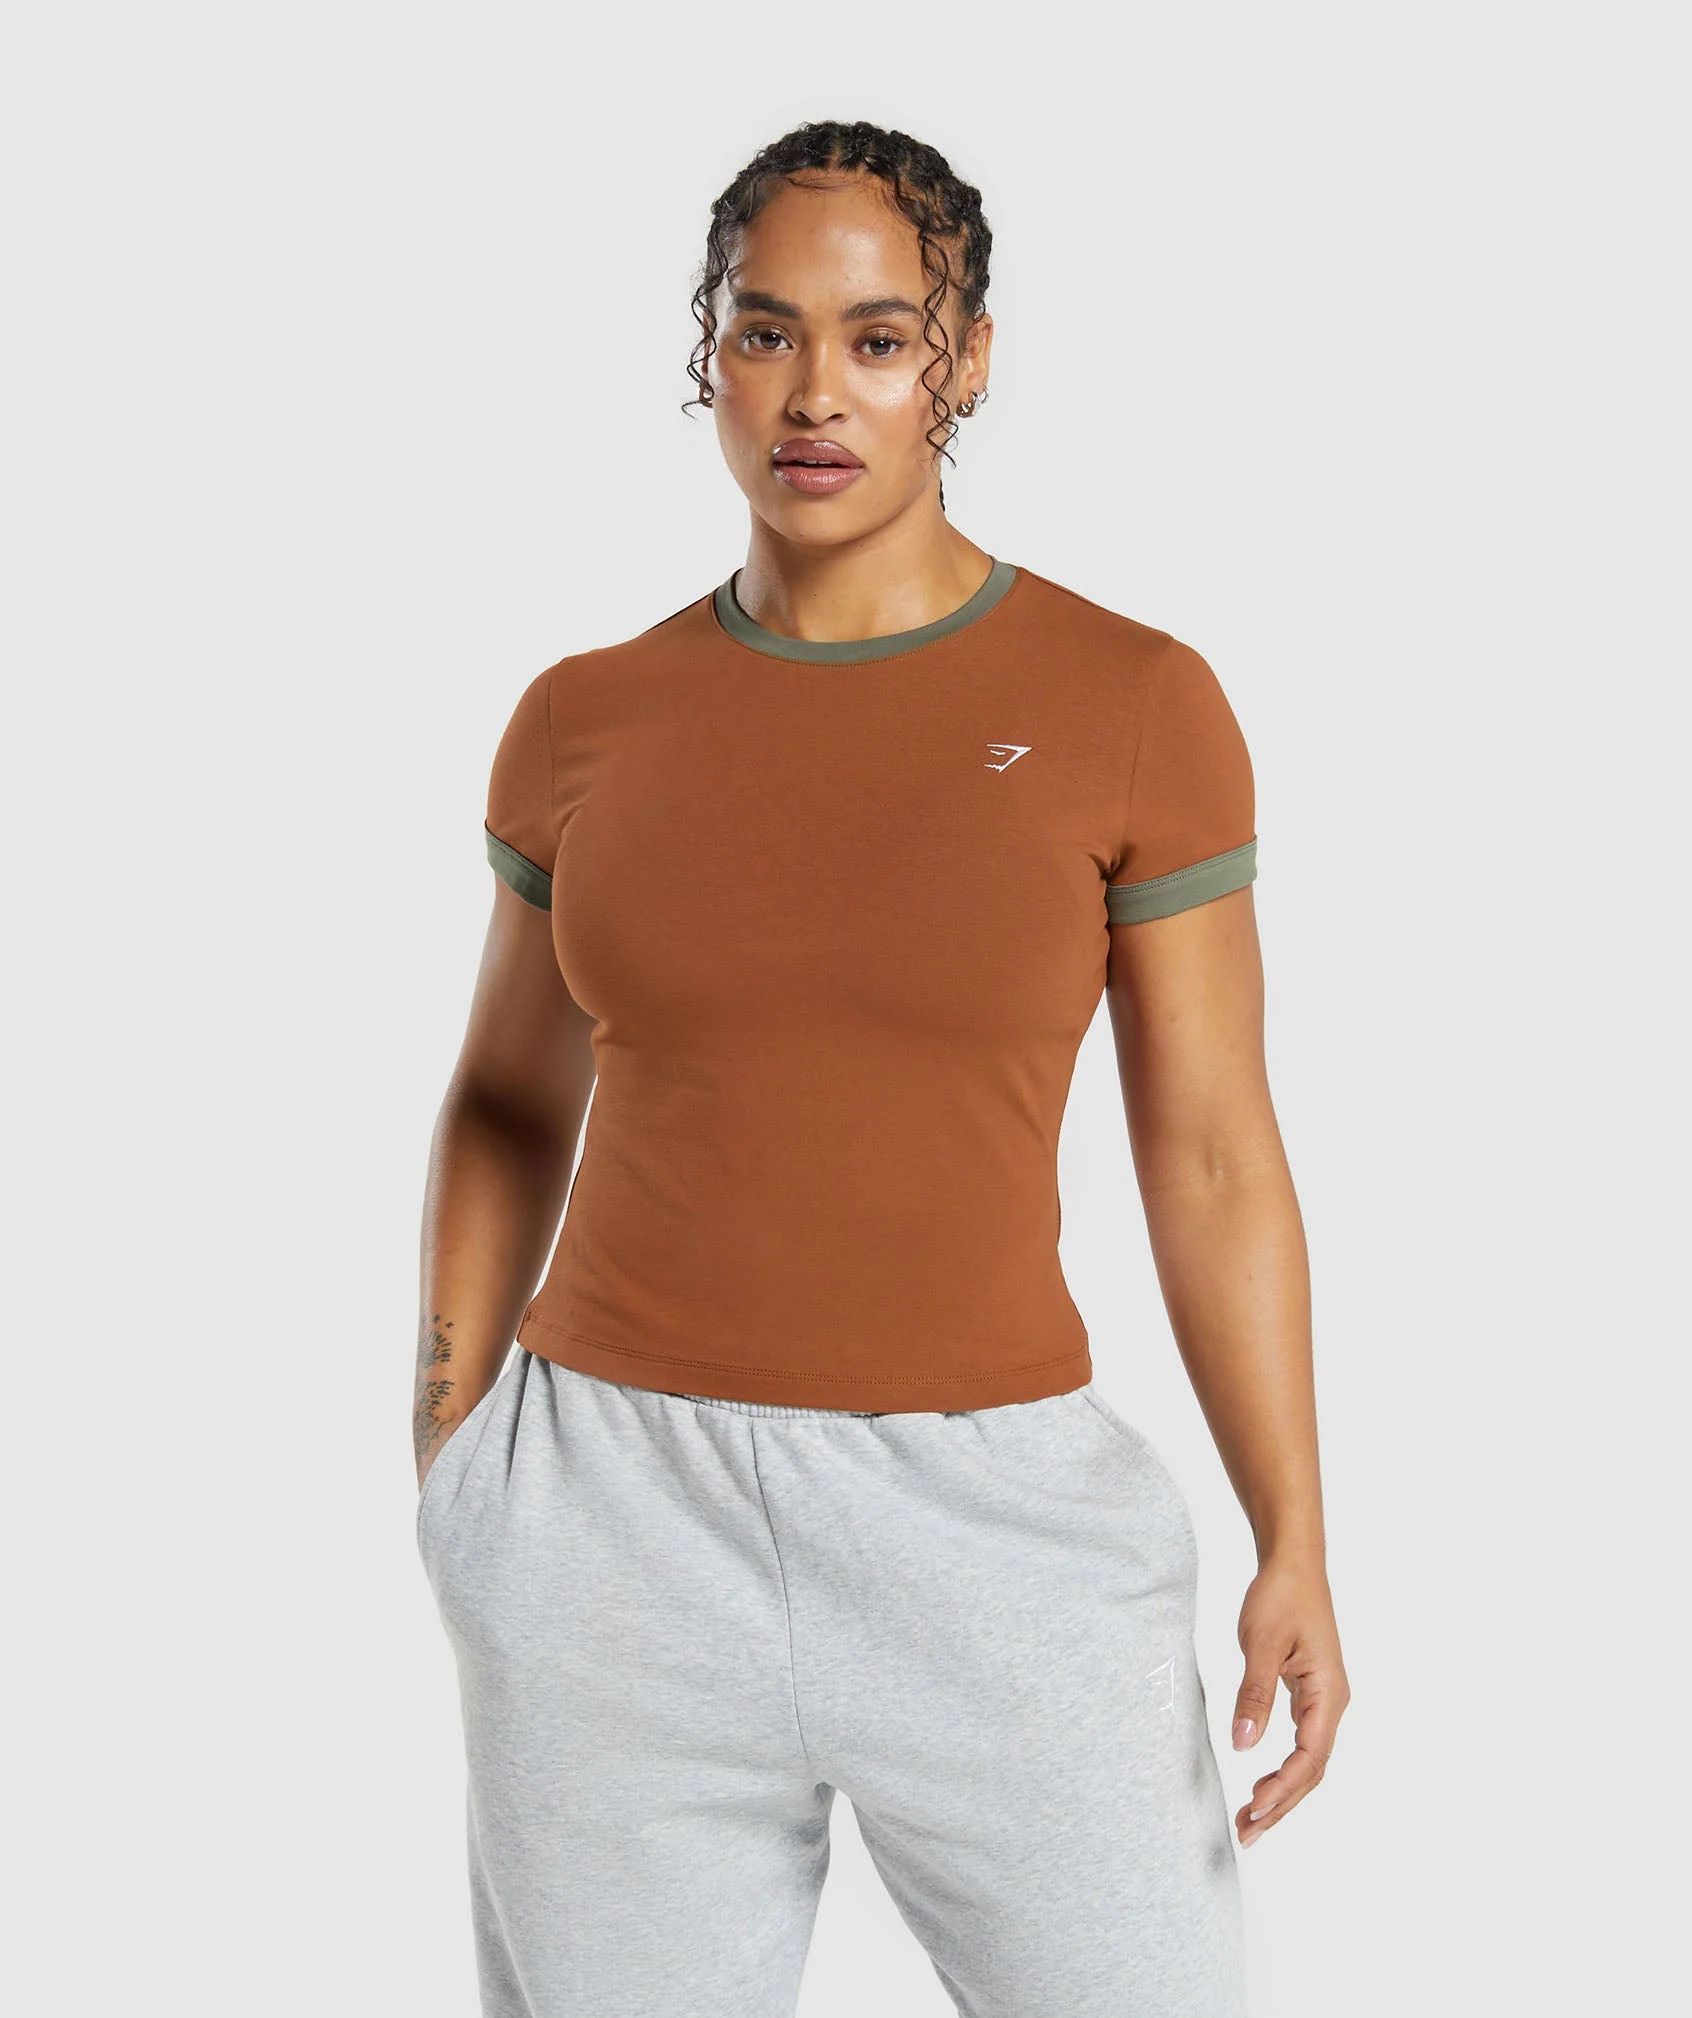 Gymshark Lifting Baby T-Shirt - Copper Brown/Camo Brown | Gymshark US